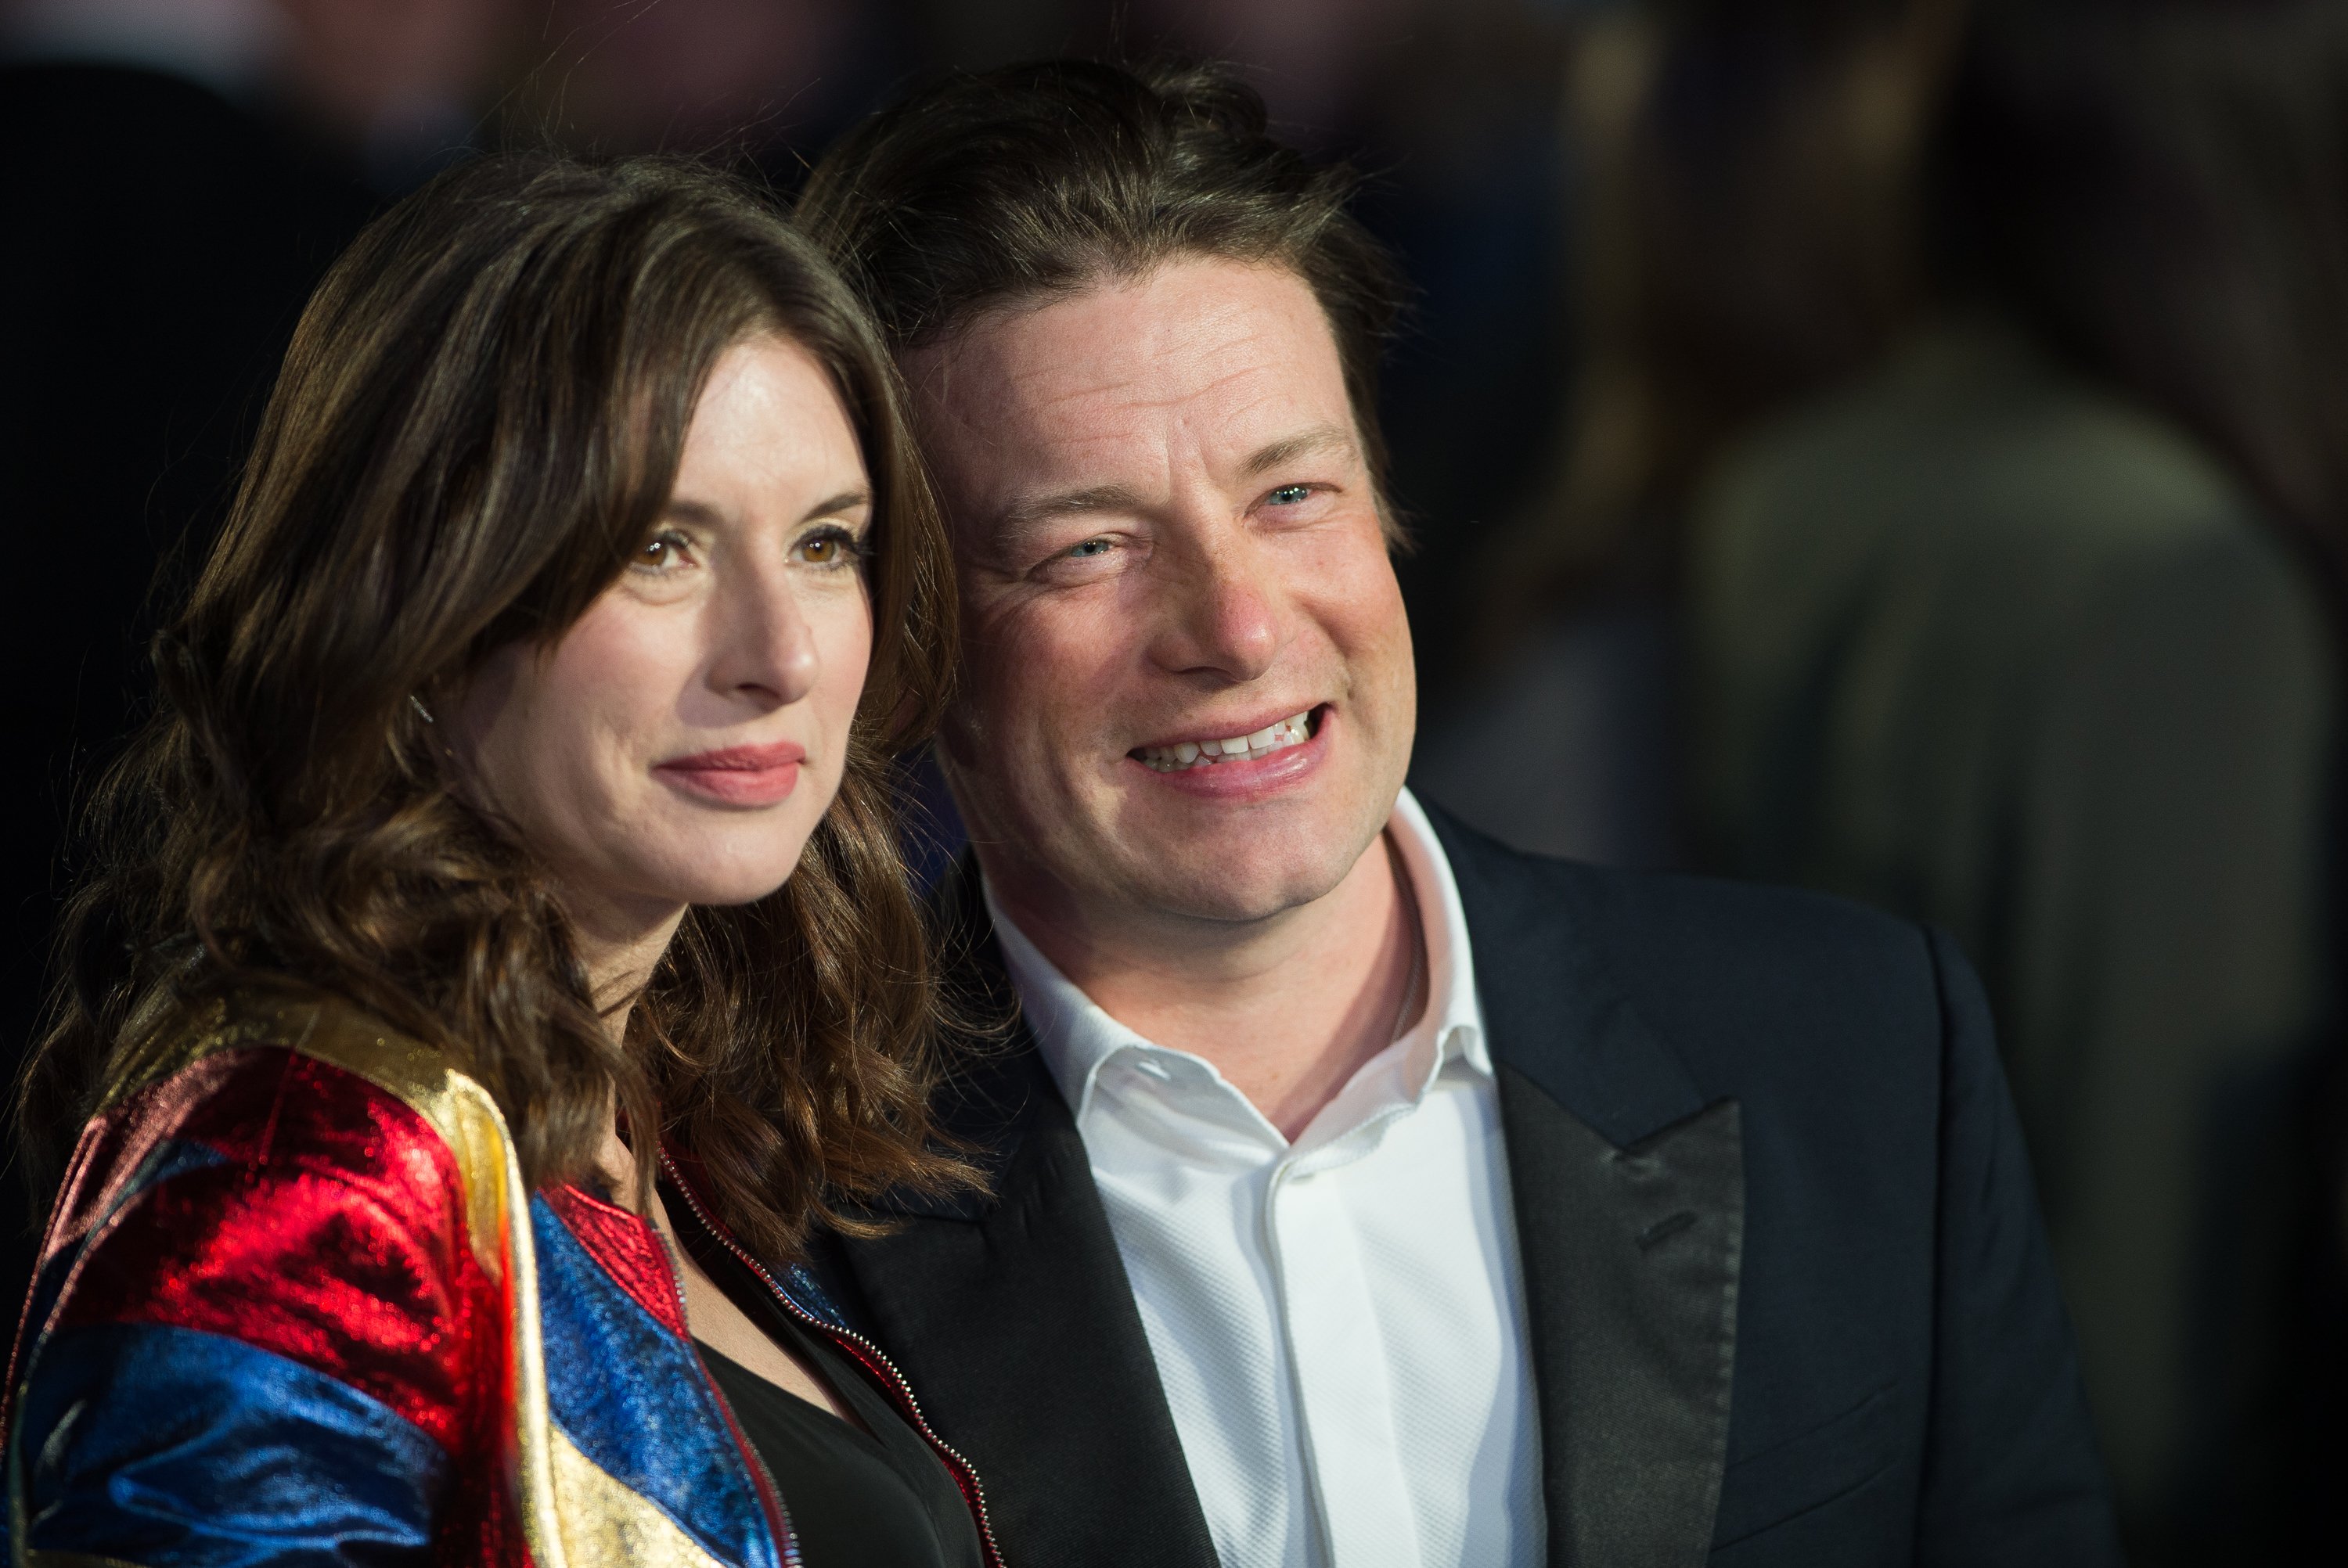 Jools Oliver and Jamie Oliver pictured at the European premiere of "Eddie the Eagle," 2016, London, England. | Photo: Getty Images 